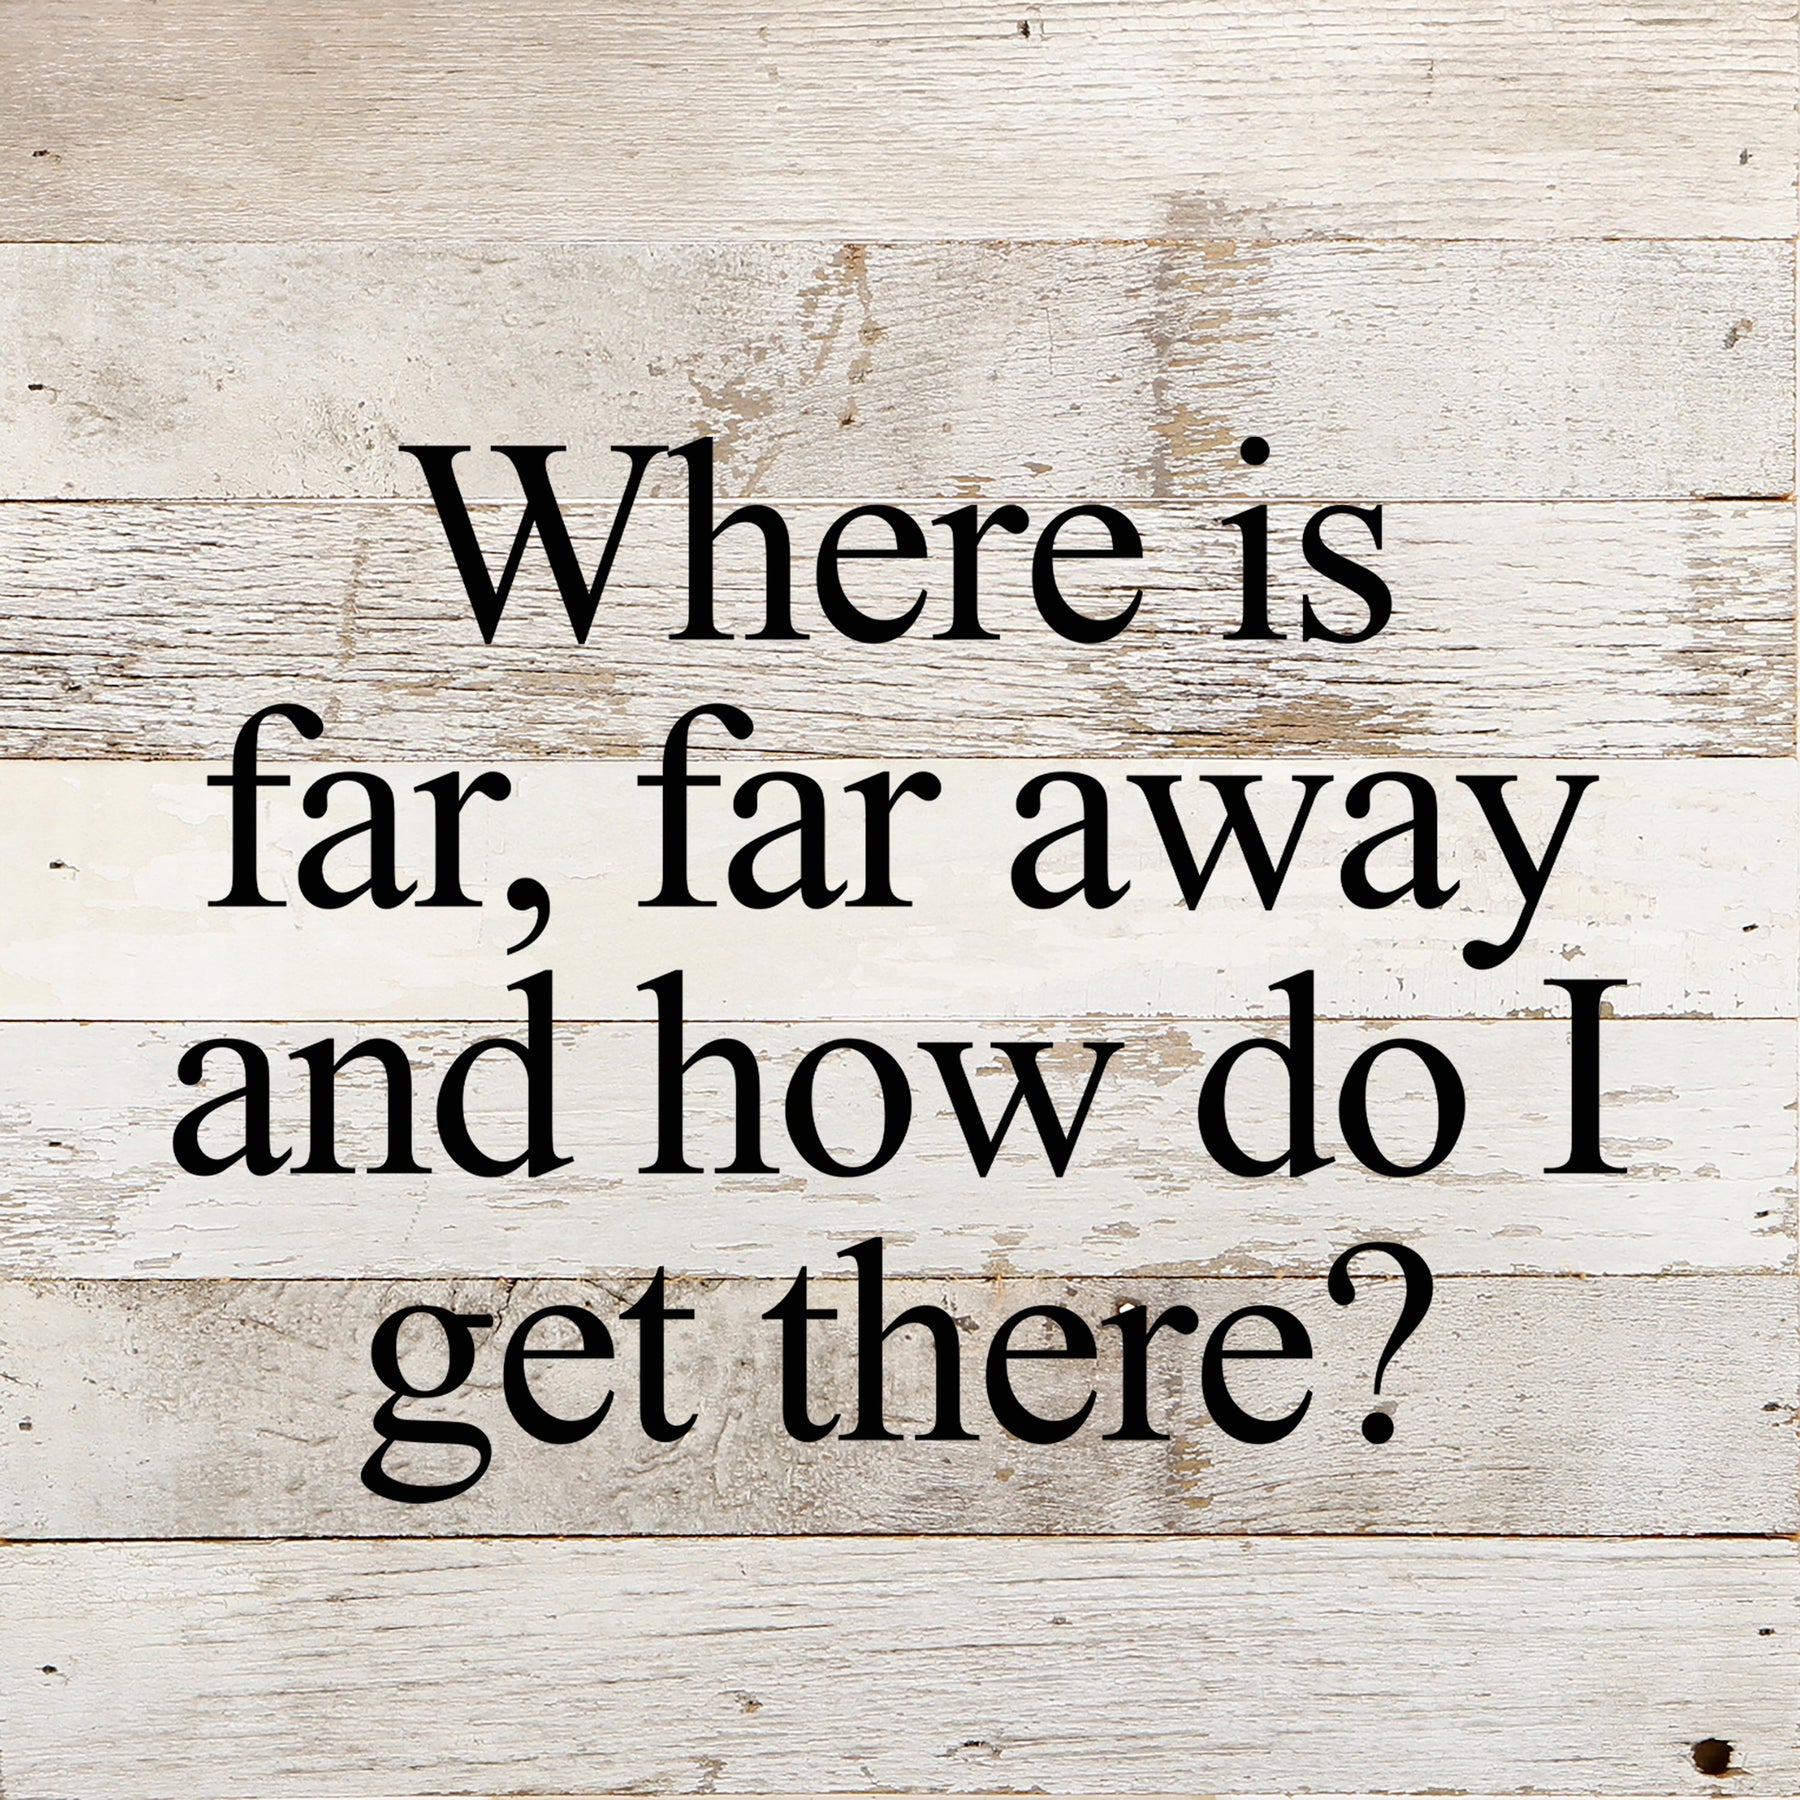 Where is far, far away and how do I get there? / 10"x10" Reclaimed Wood Sign